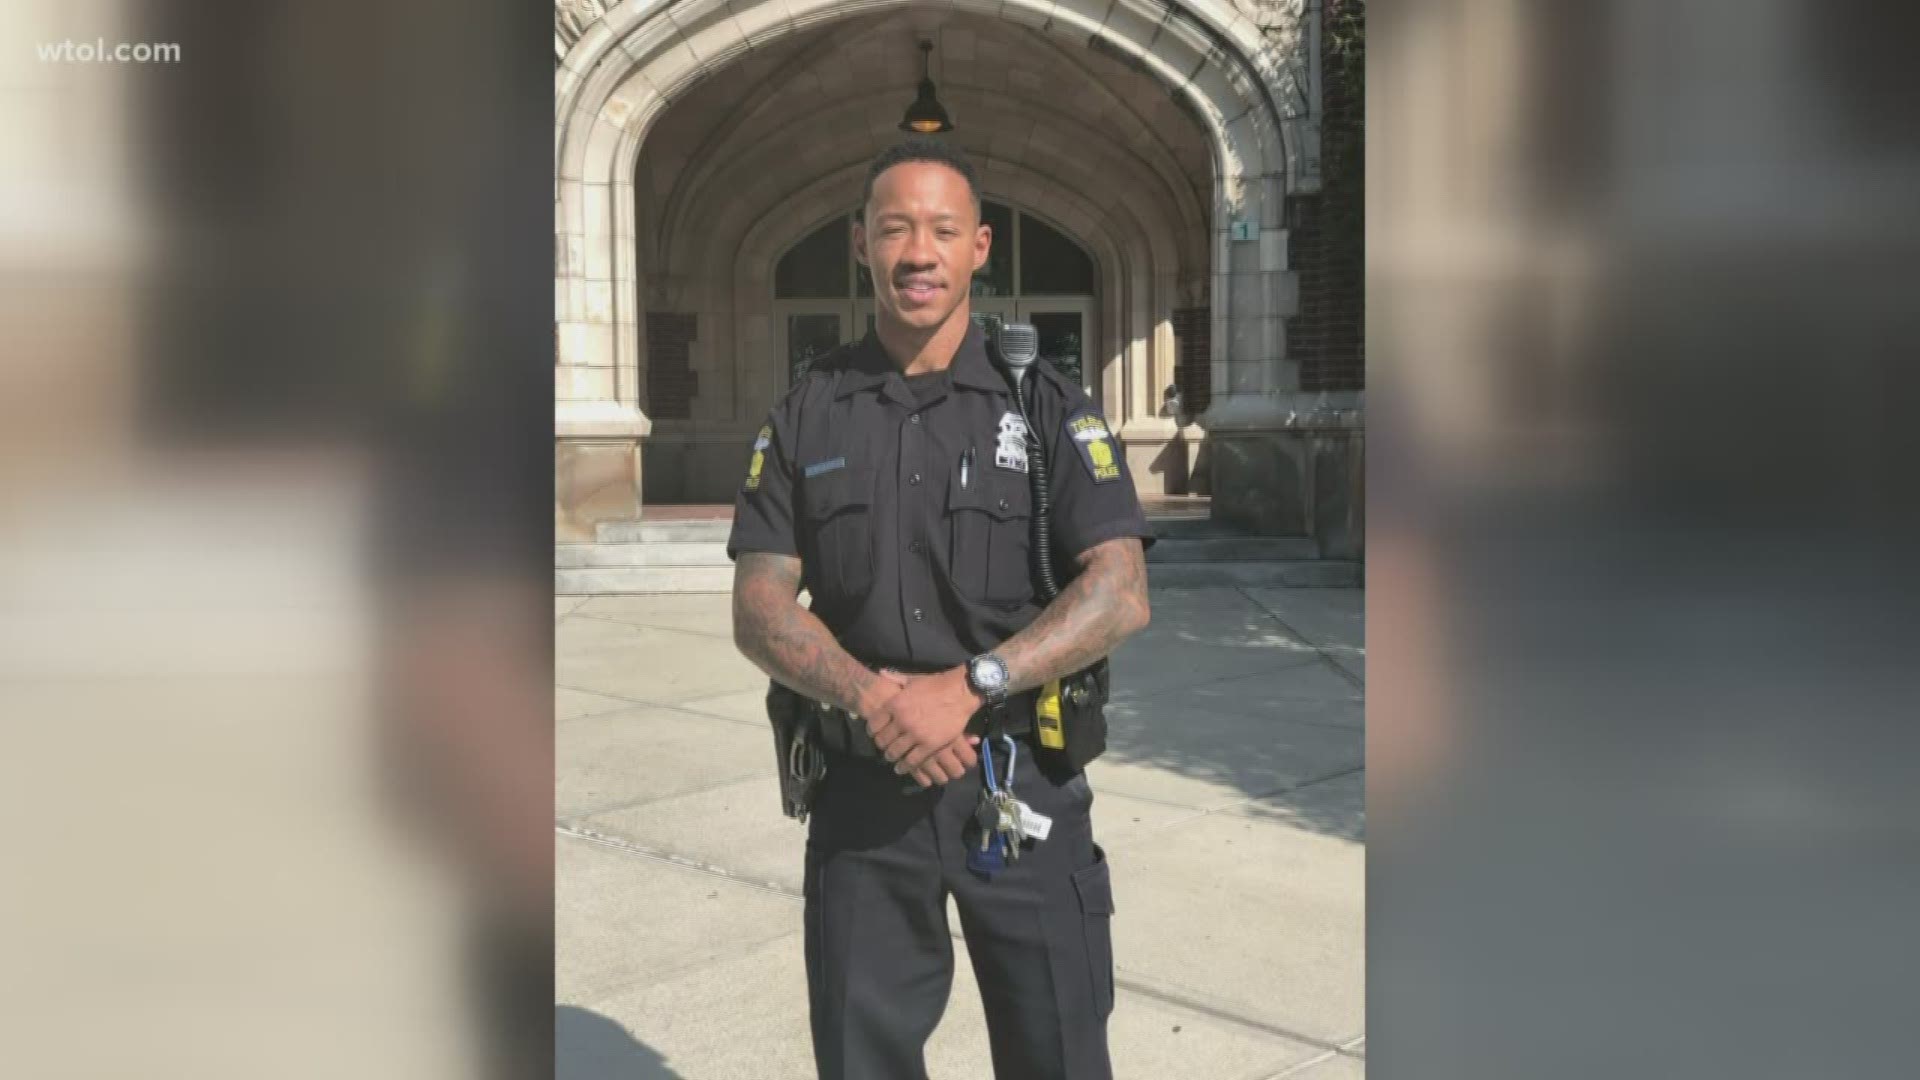 Toledo Police say Officer Jeron Ellis was alerted that a student was in possession of a gun at school.